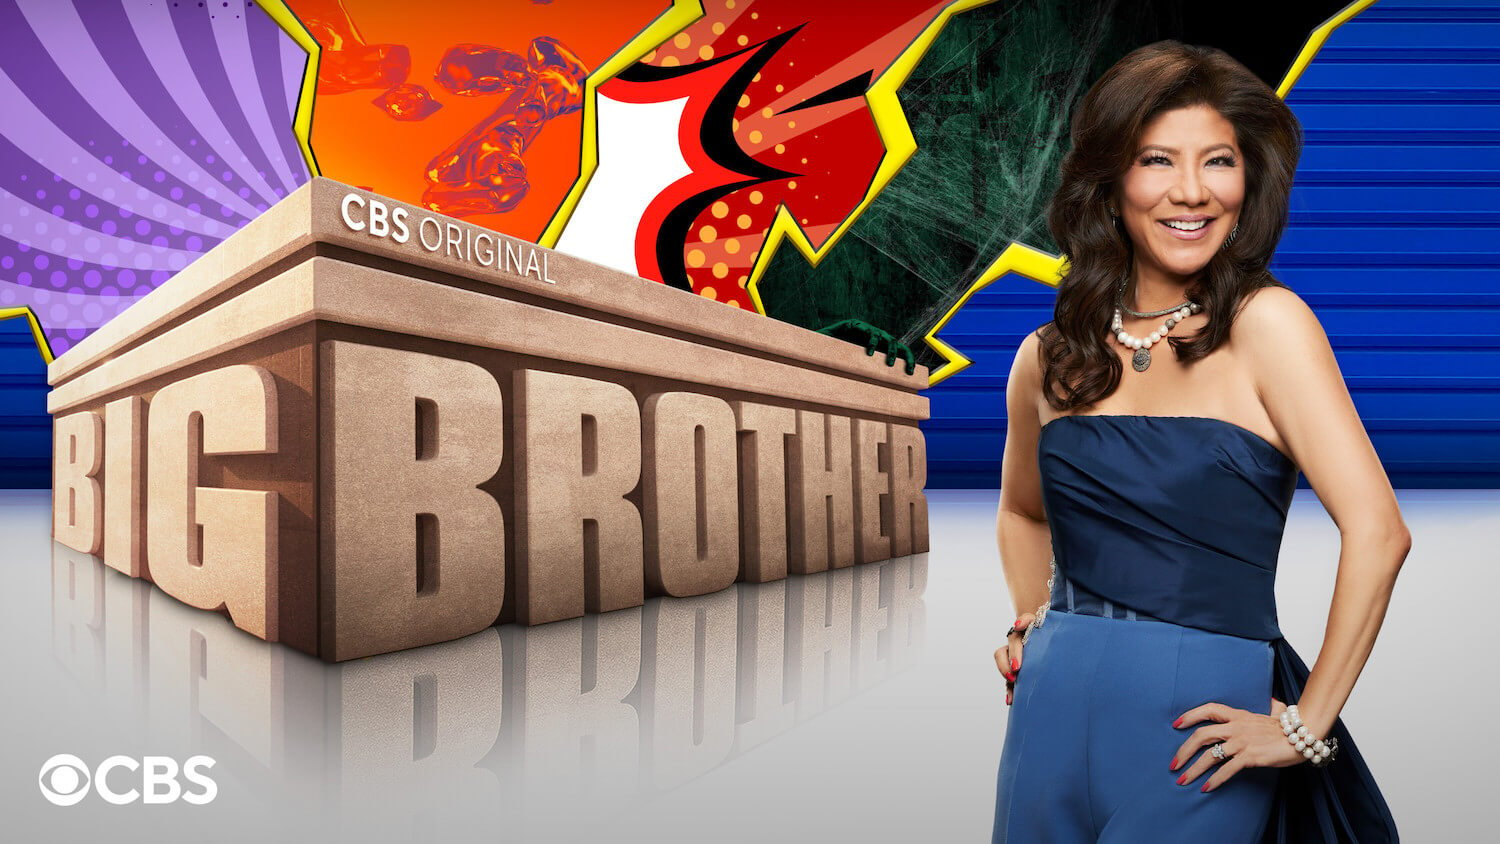 Julie Chen Moonves in front of the 'Big Brother' sign ahead of season 25